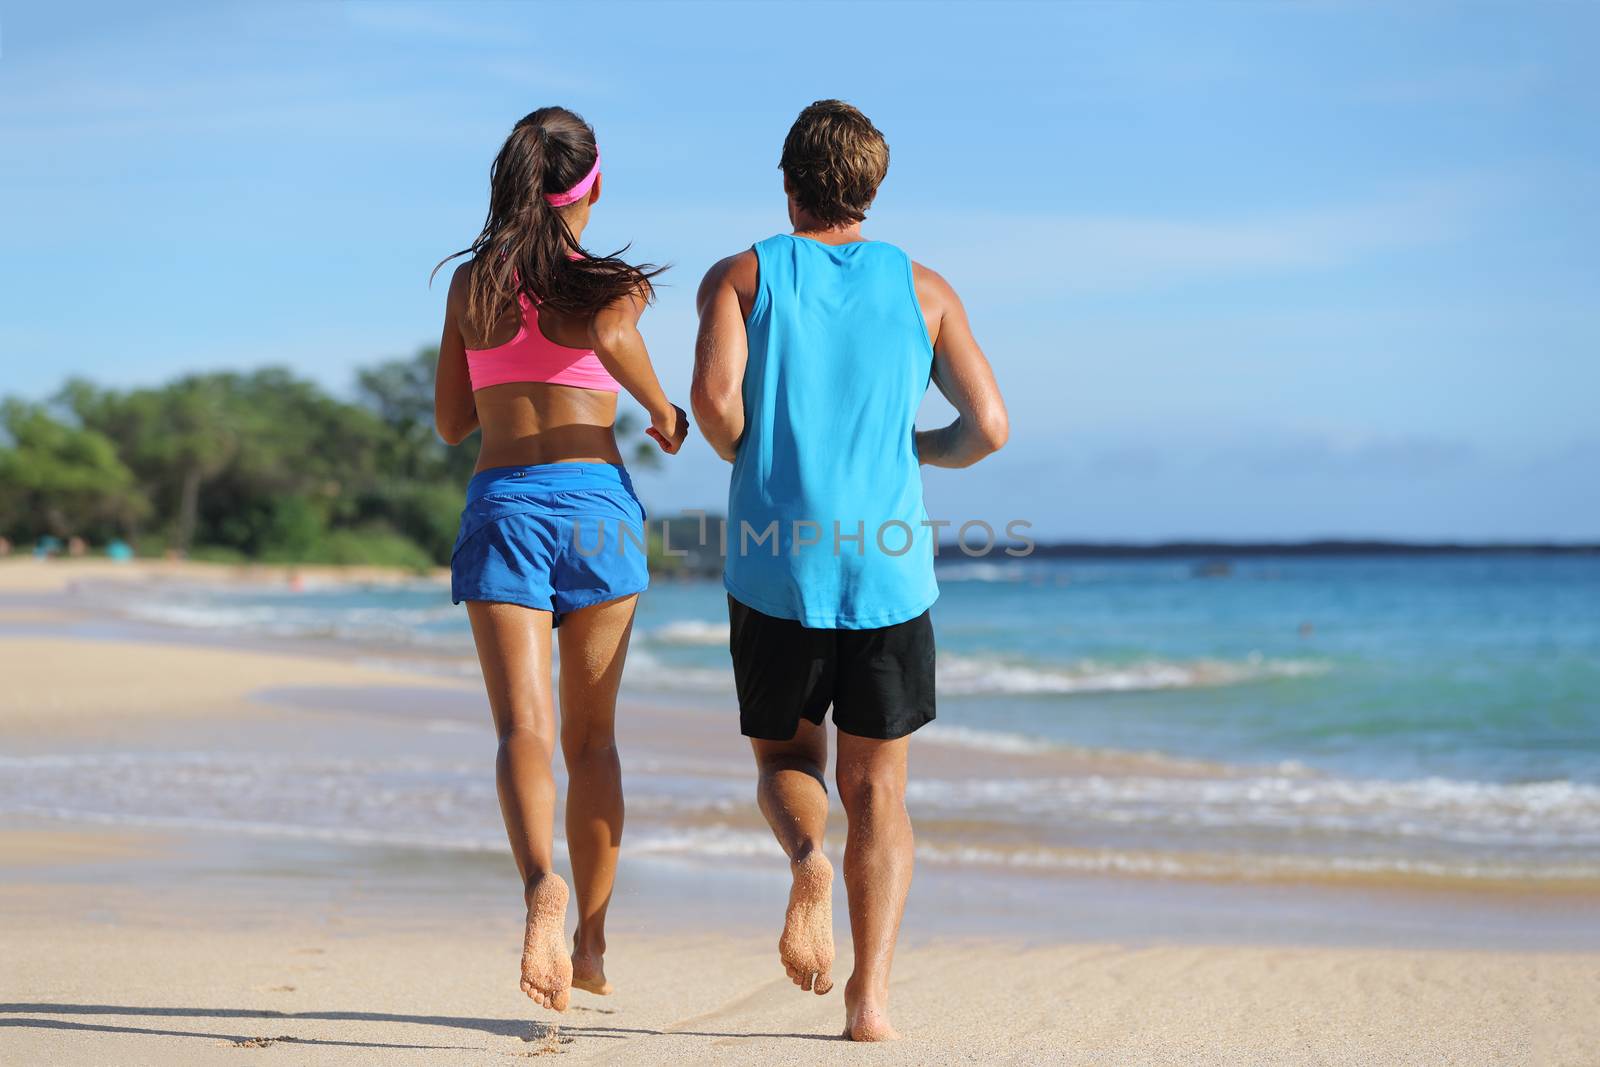 Two fitness athletes running together on beach. People from behind jogging away barefoot on sand on tropical travel destination. Healthy fit young adults with muscular slim legs training cardio.